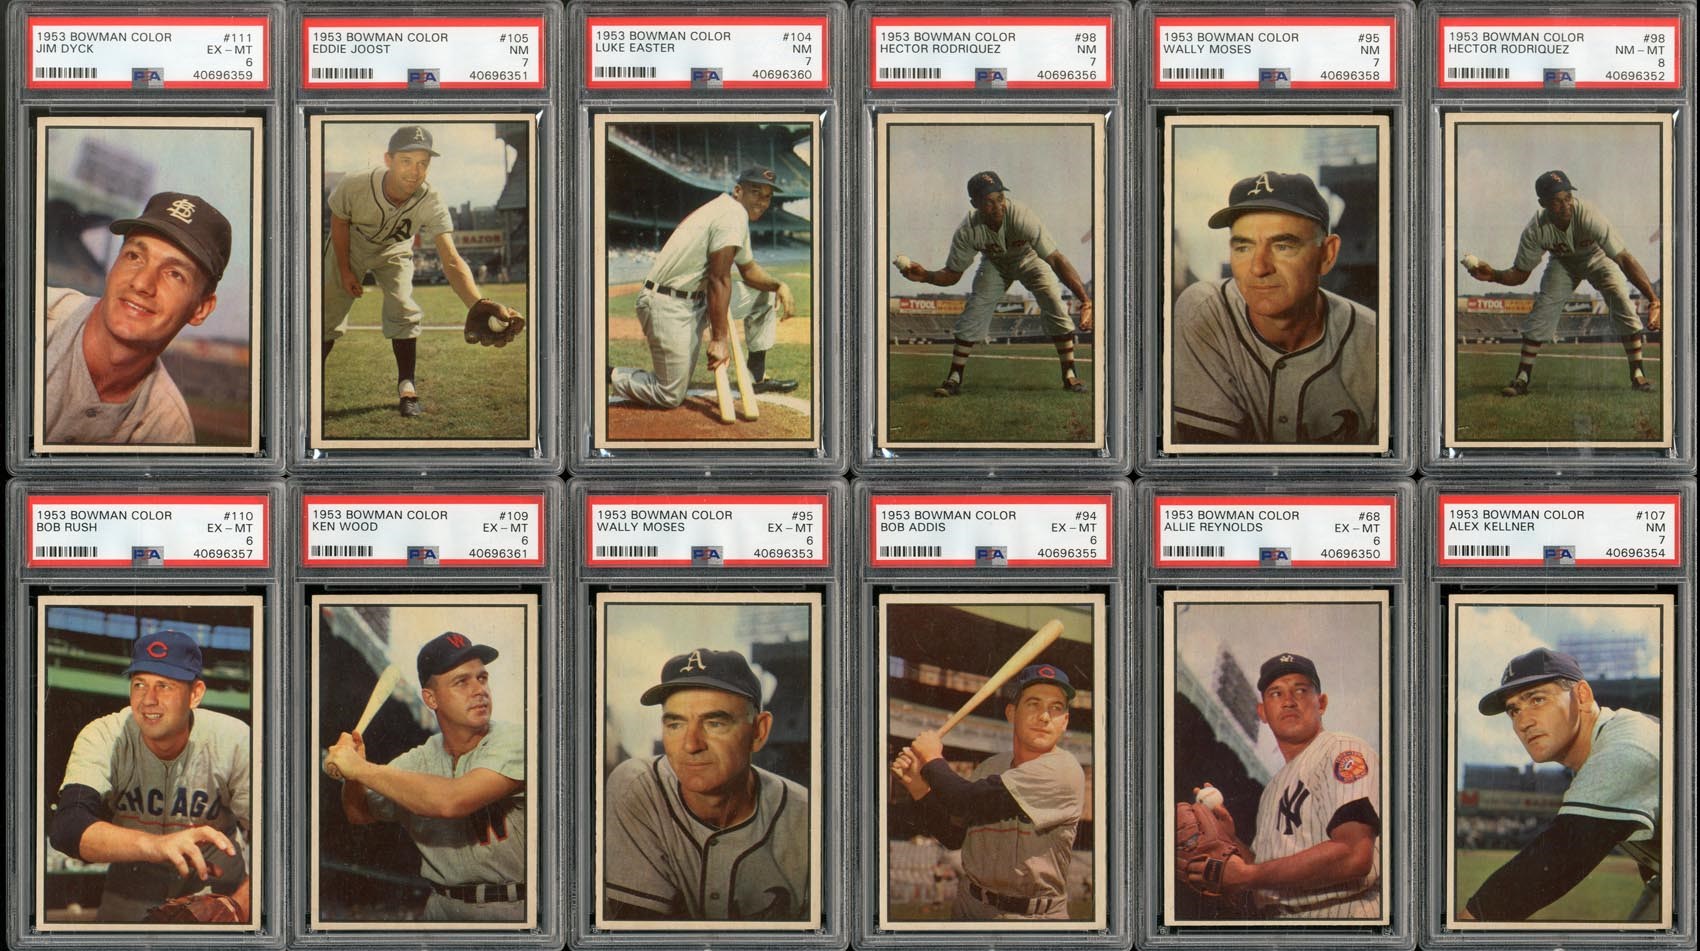 Baseball and Trading Cards - 1953 Bowman Color PSA Graded Collection